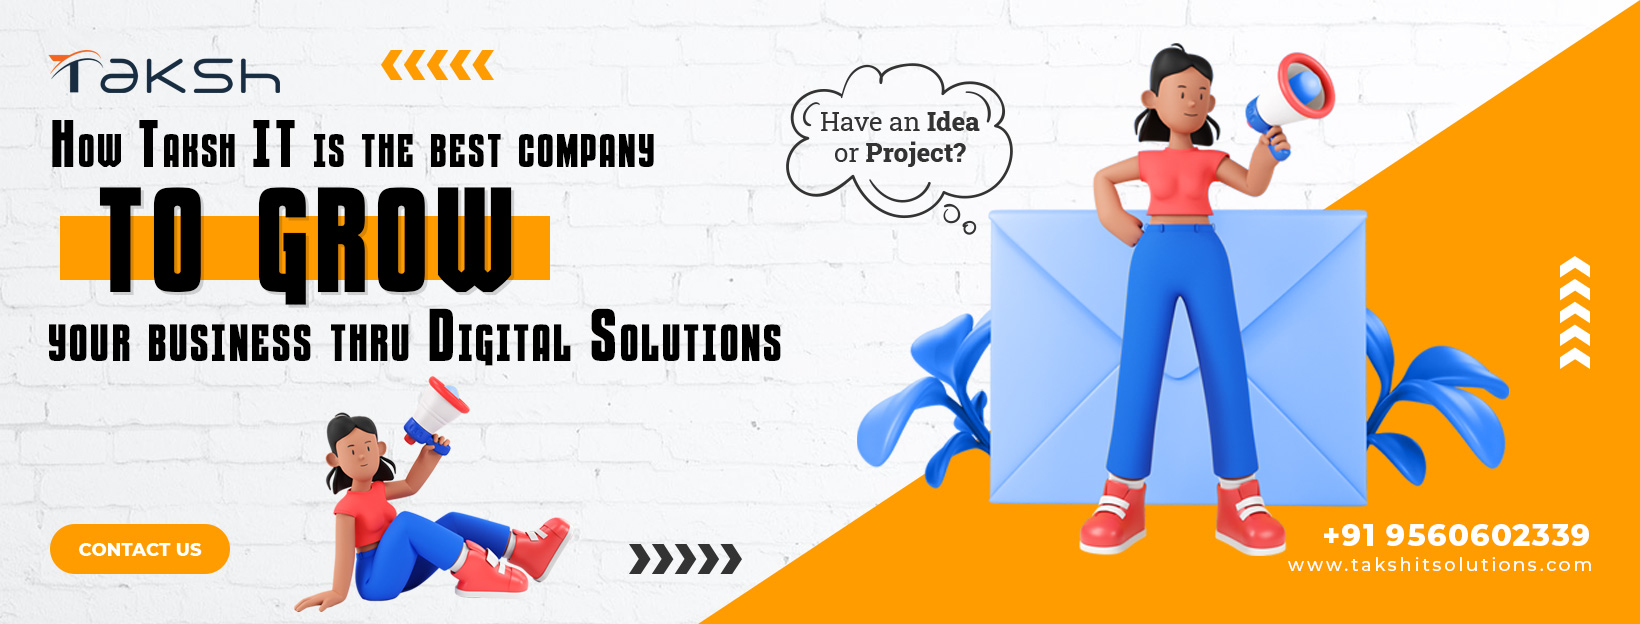 Digital Marketing Company In Noida | Taksh It Solutions Private Limited